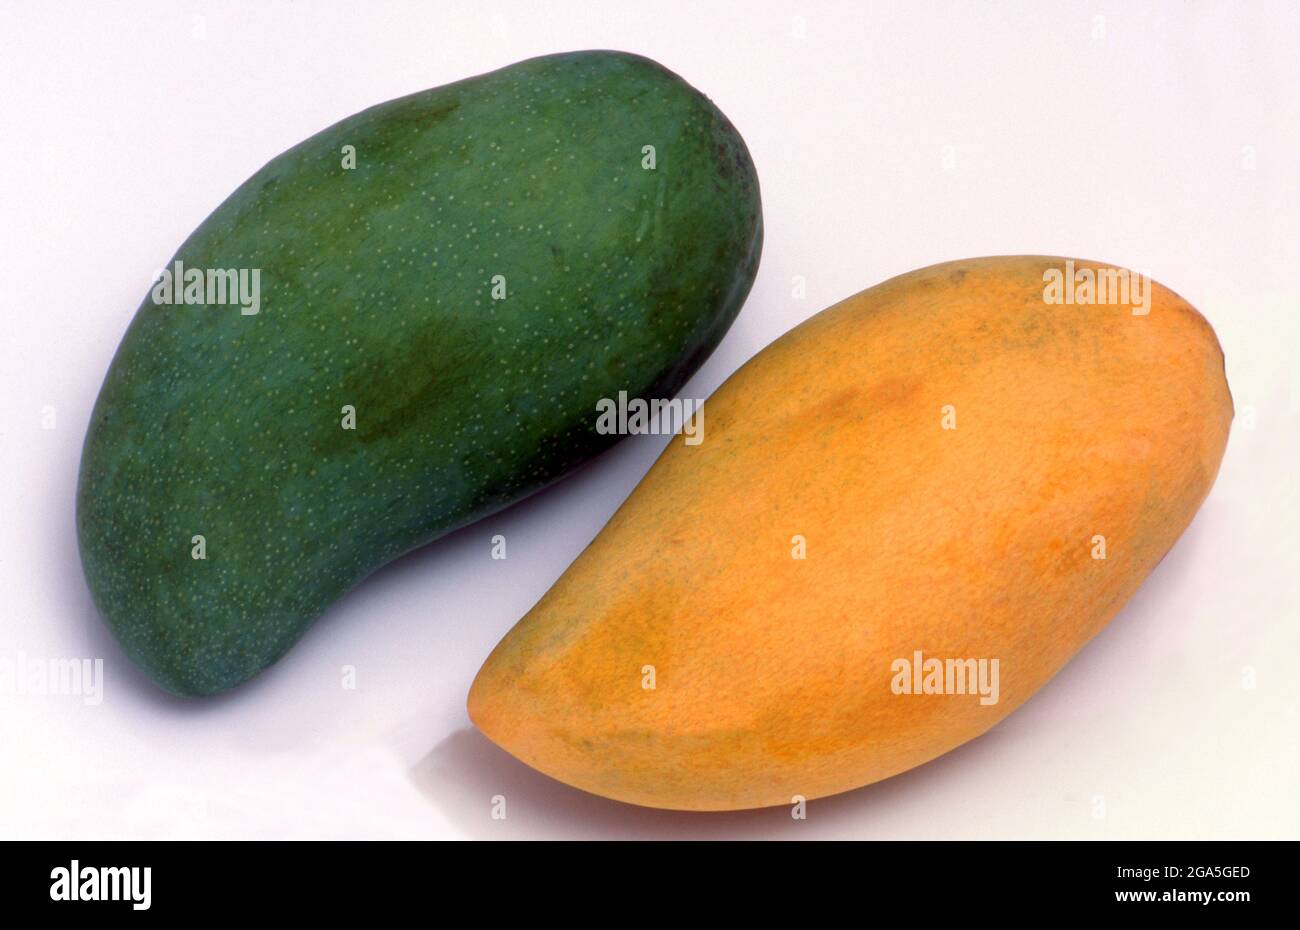 A mango is an edible stone fruit produced by the tropical tree Mangifera indica which is believed to have originated from the region between northwestern Myanmar, Bangladesh, and northeastern India. Mangoes have been cultivated in South and Southeast Asia since ancient times. Stock Photo